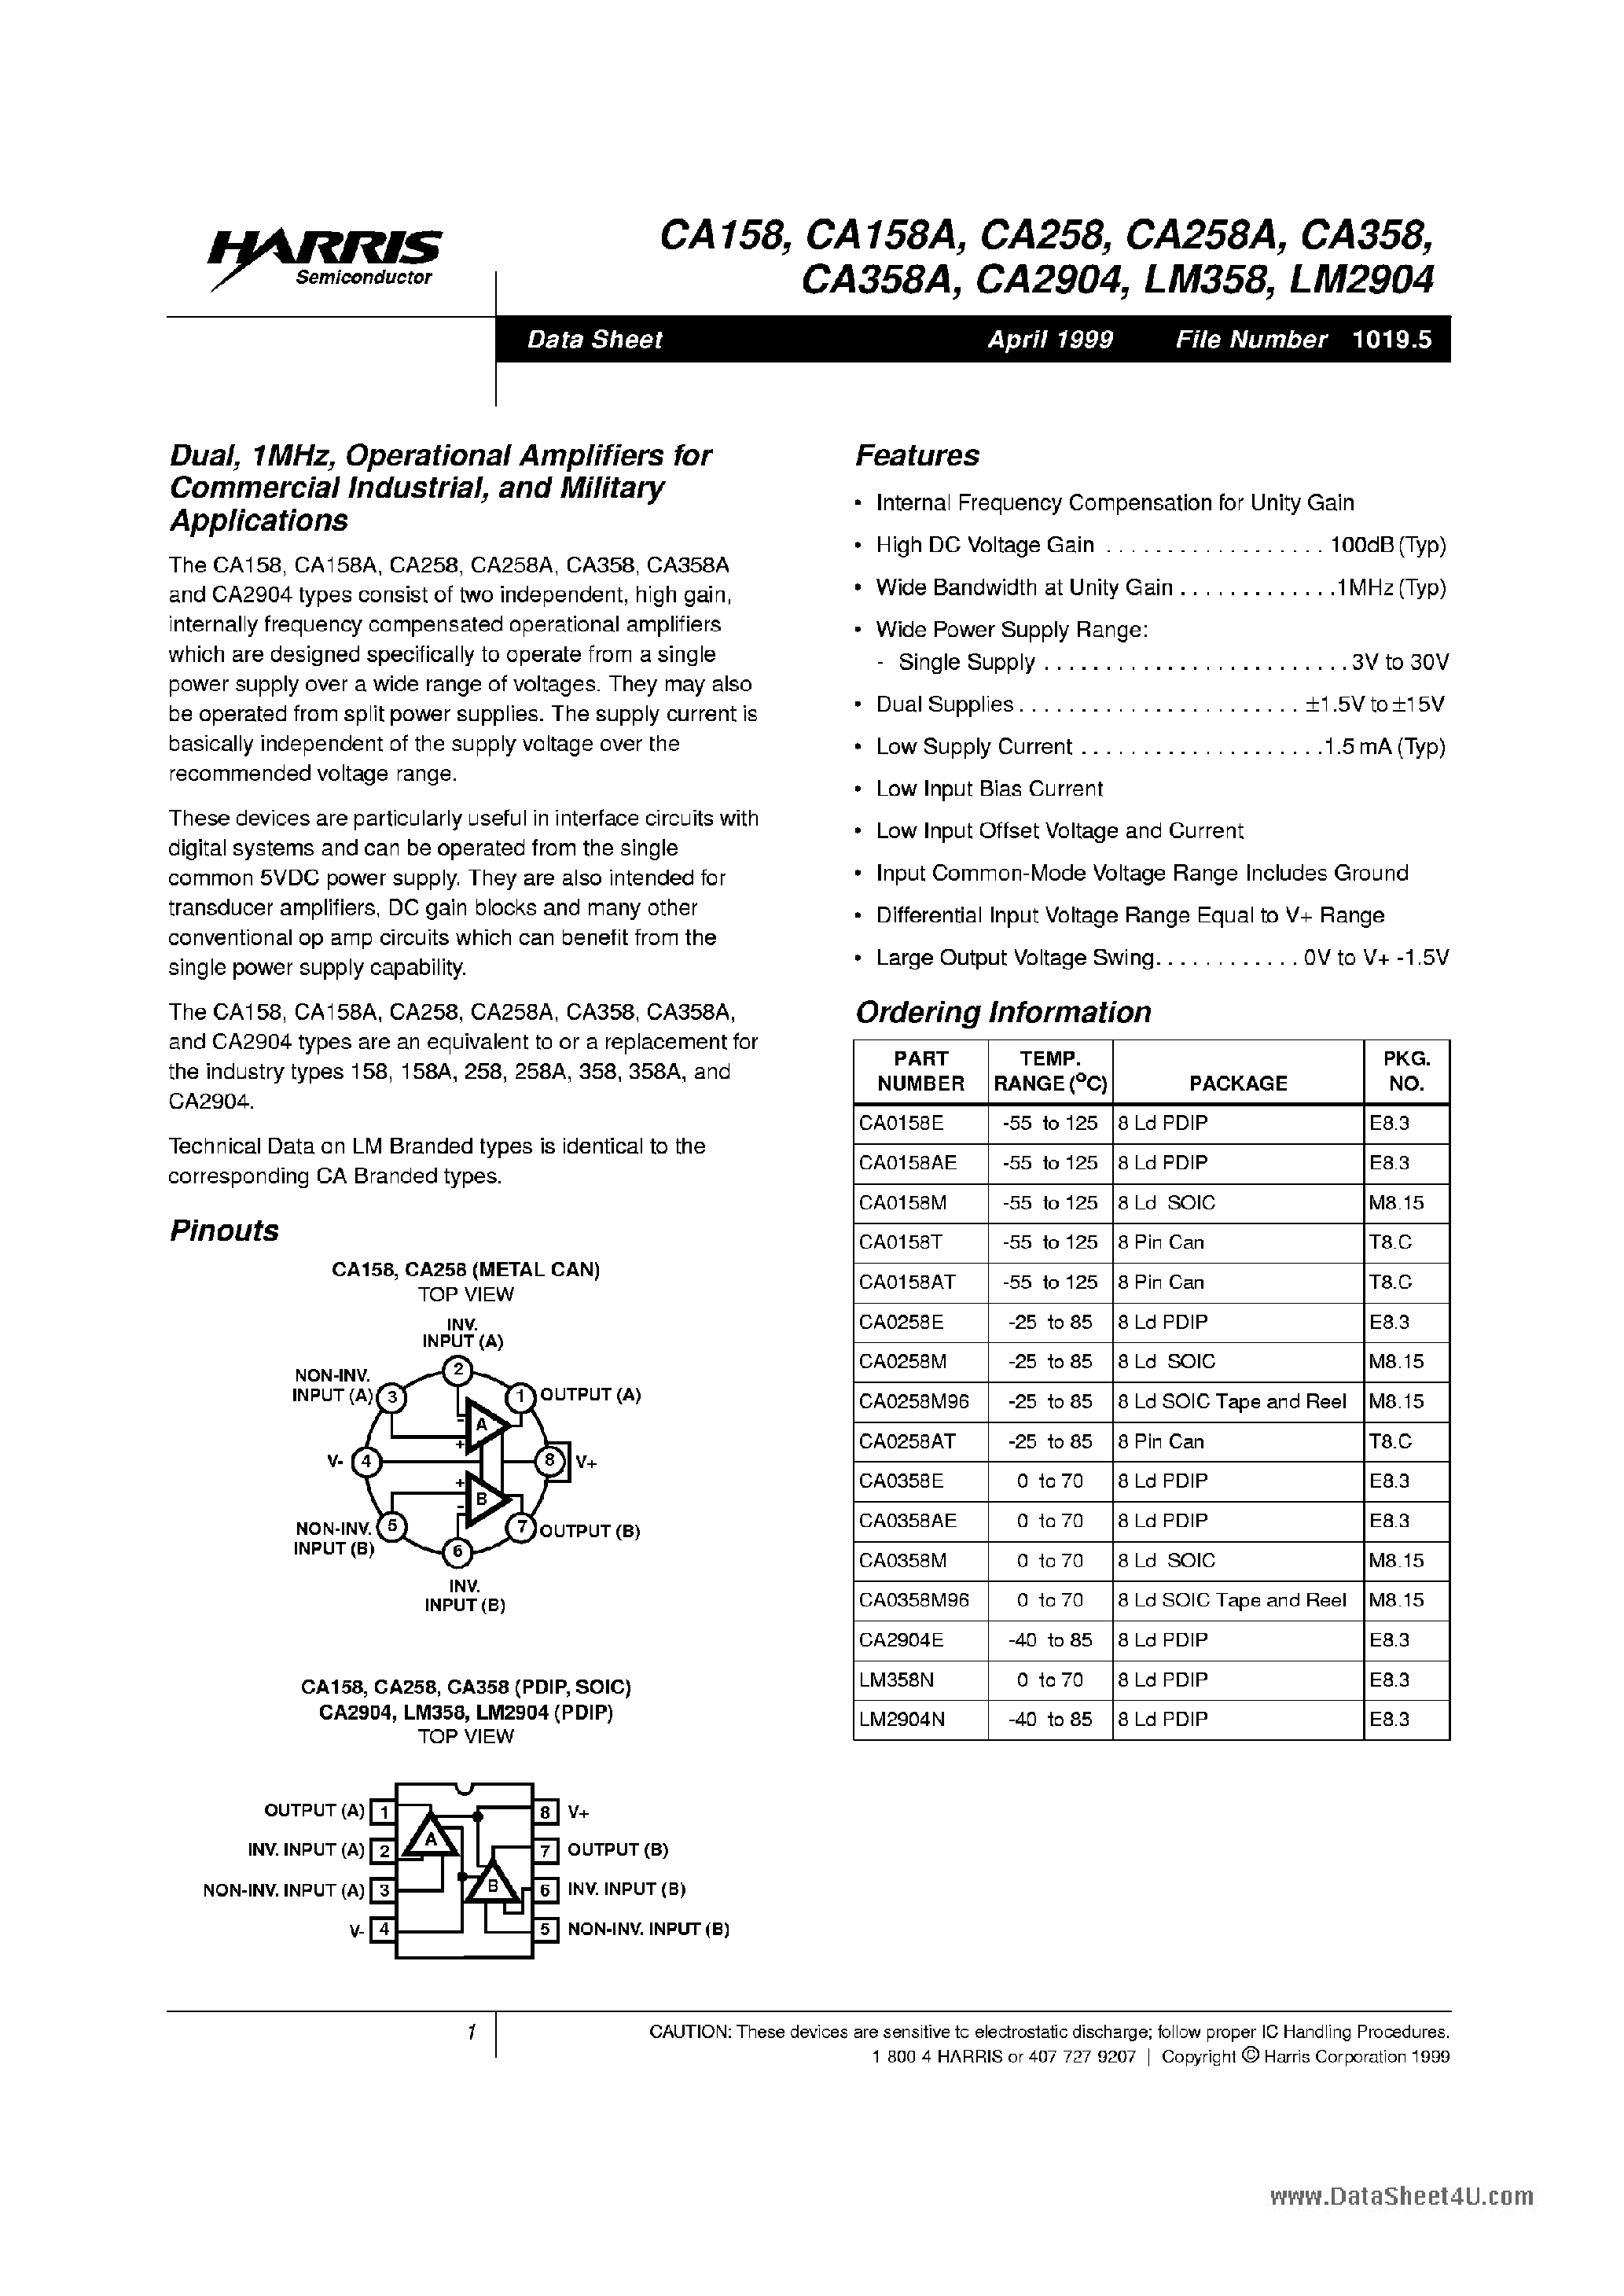 Datasheet CA258 - 1MHz OPERATIONAL AMPLIFIERS page 1